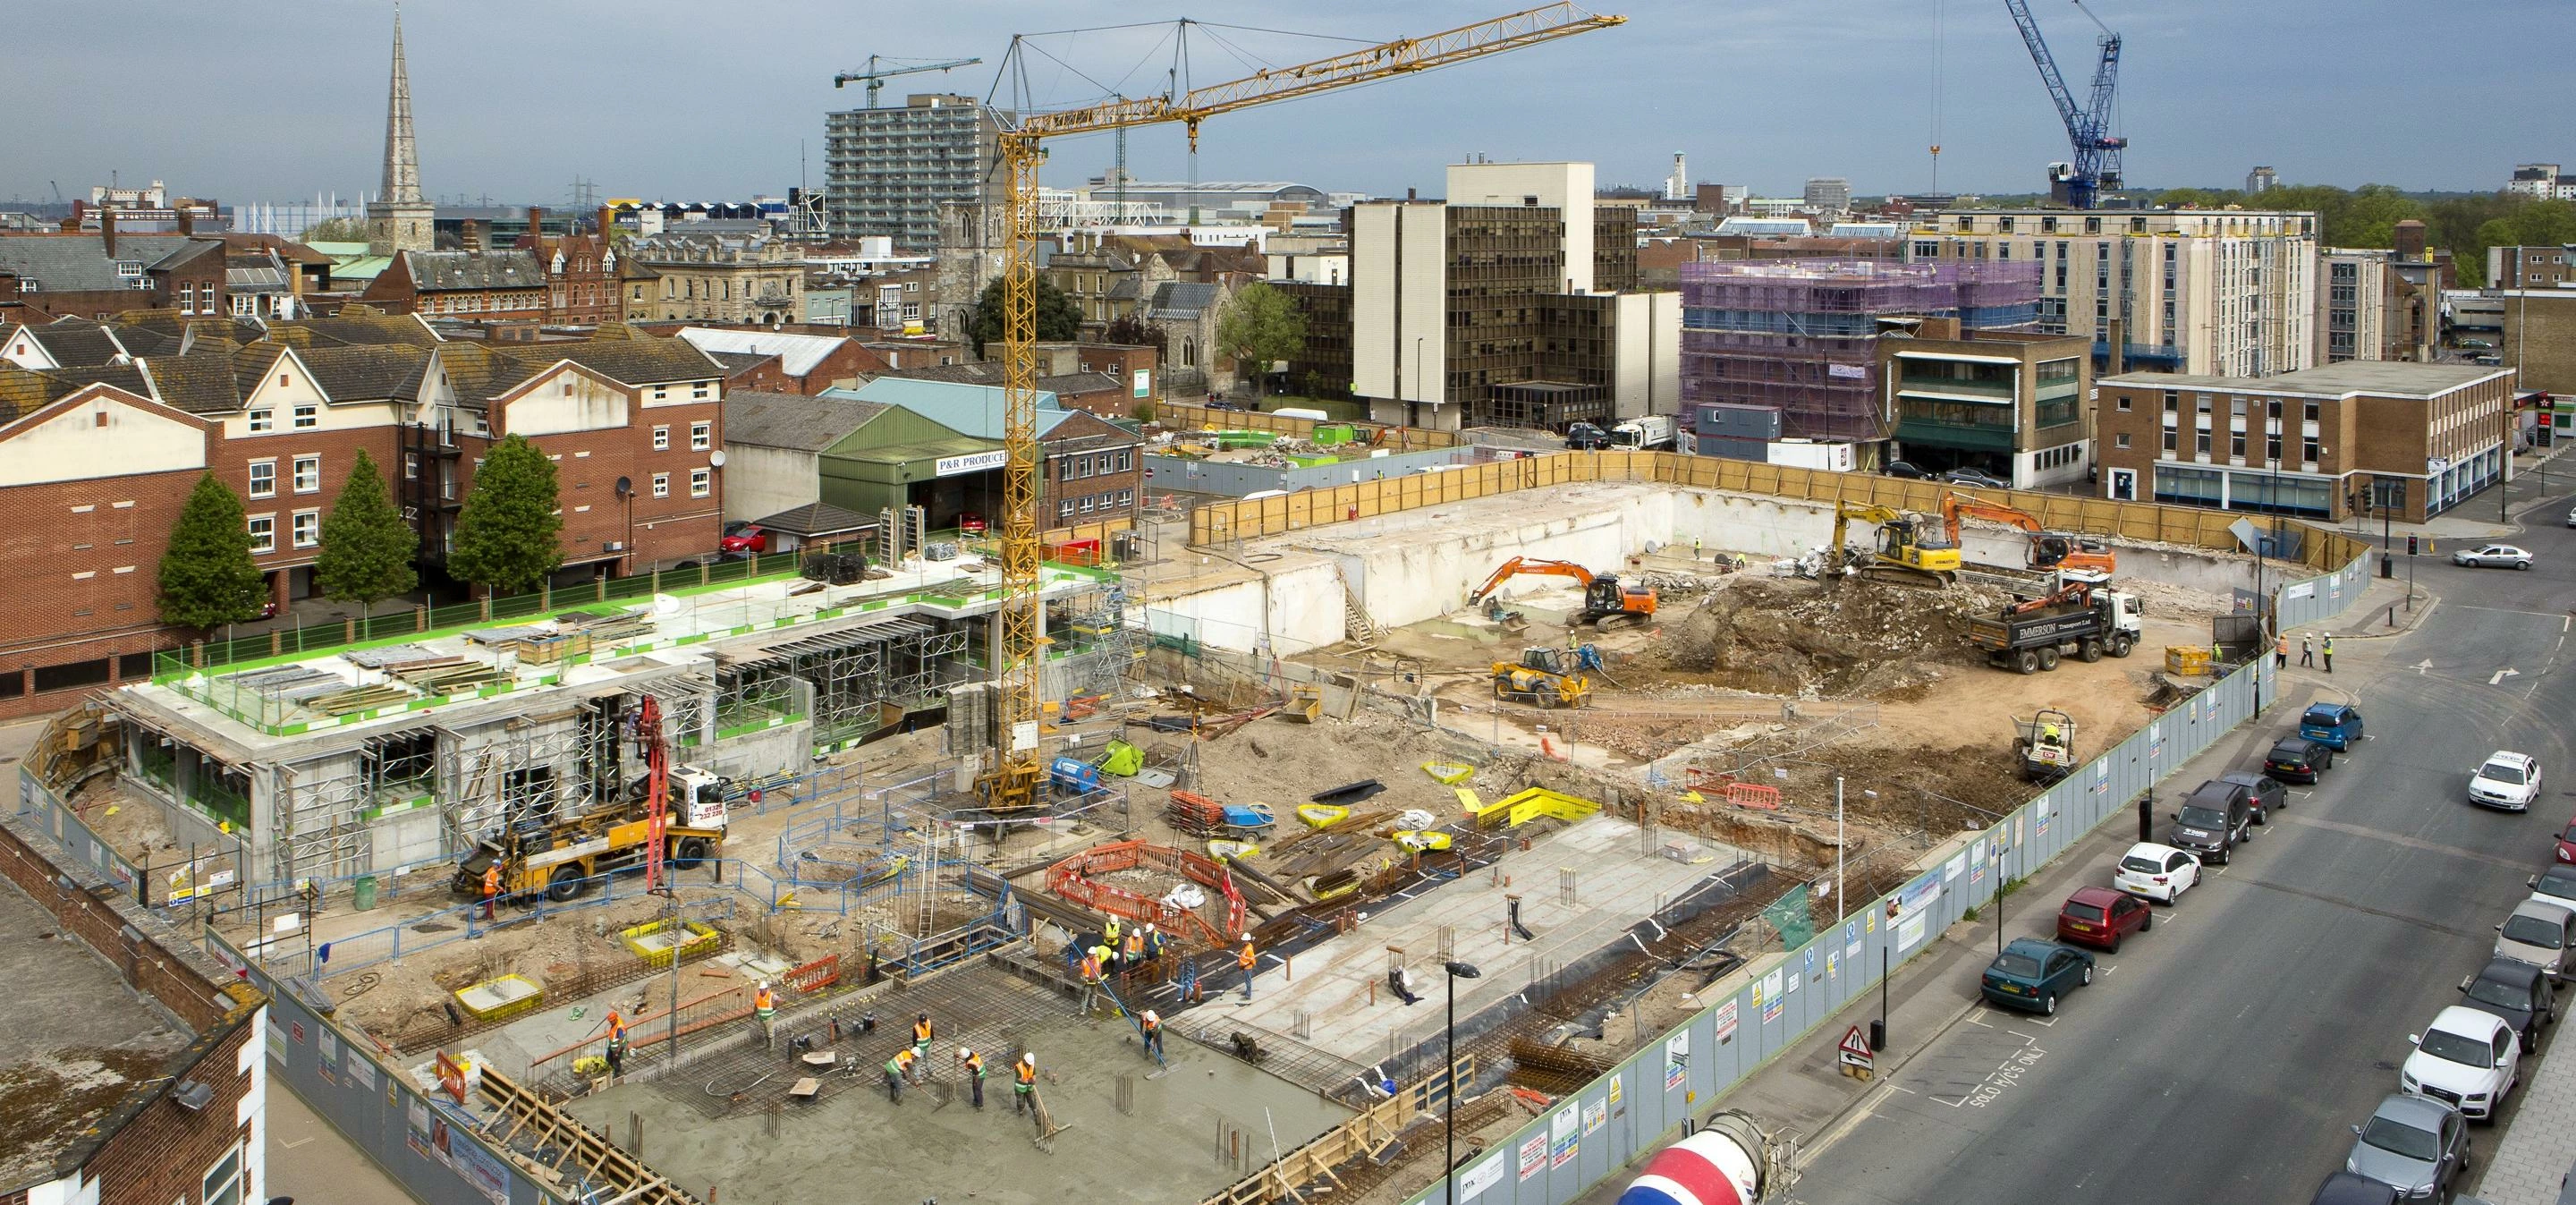 Progress at the Fruit and Vegetable Market site (credit  SWN photography)